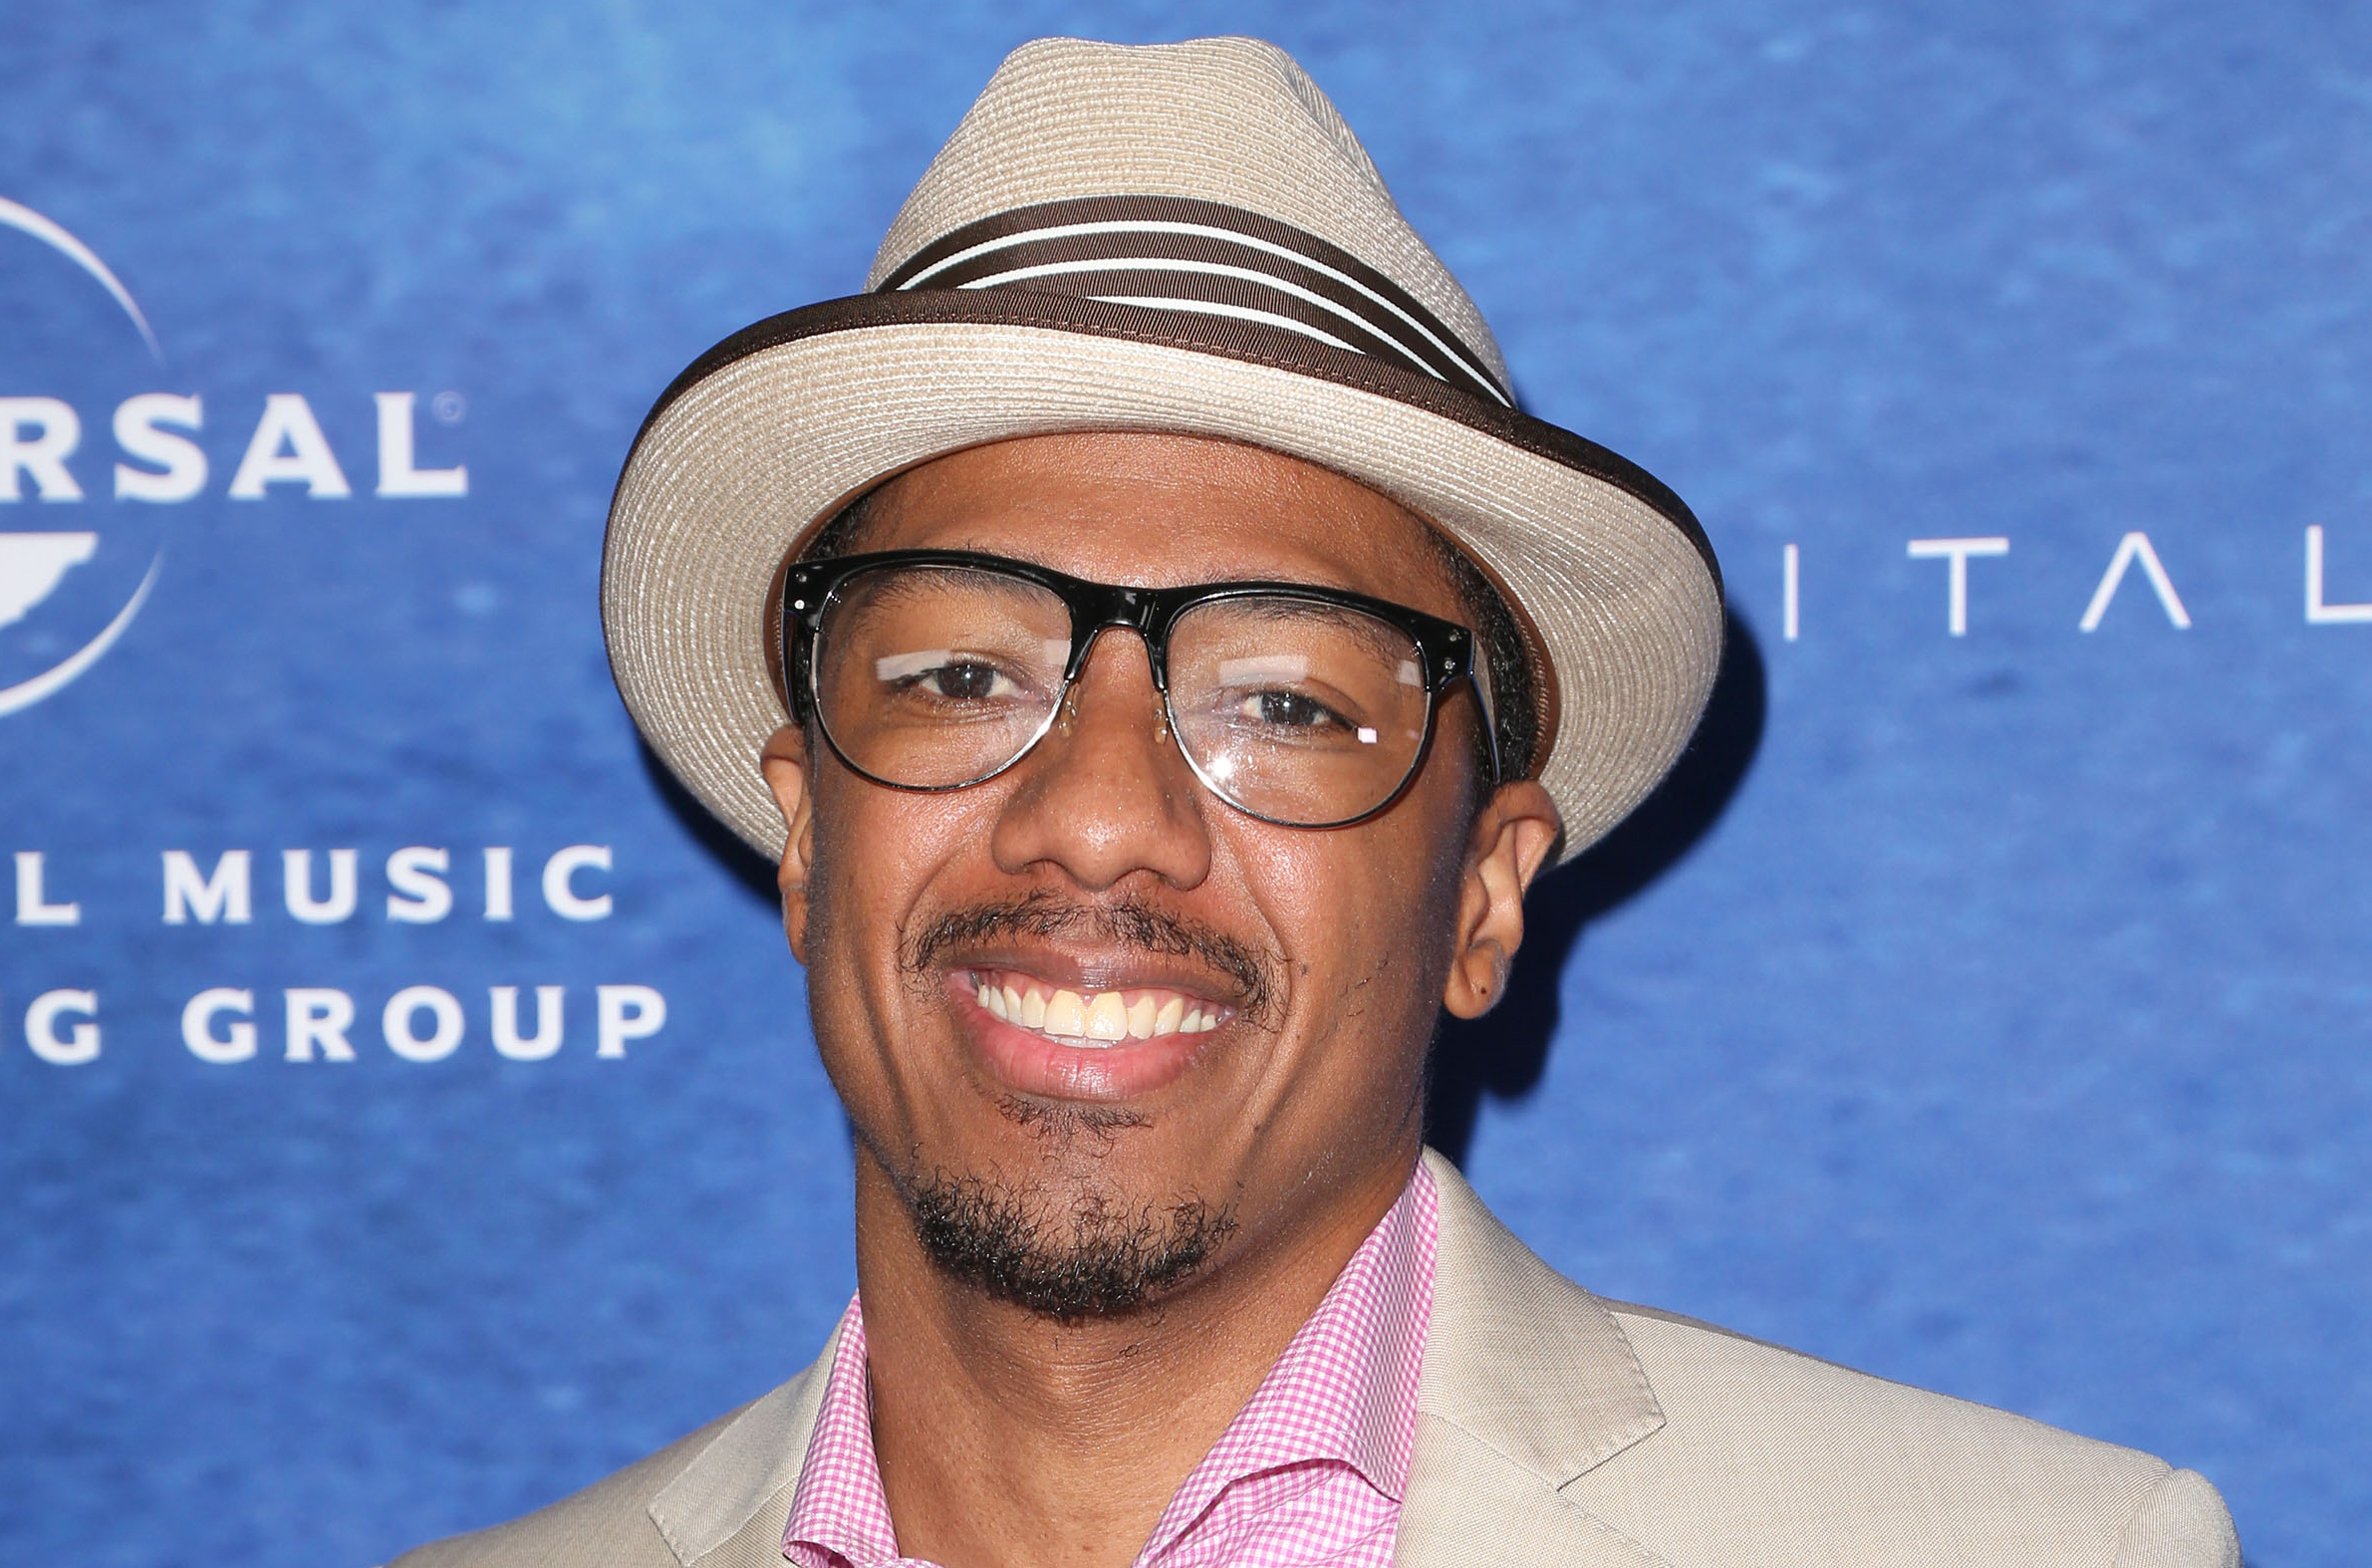 12/09/2016 - Nick Cannon - 11th Annual March of Dimes Celebration of Babies - Arrivals - Beverly Wilshire Four Seasons Hotel - Beverly Hills, CA, USA - Keywords: Vertical, 2016 March of Dimes Celebration of Babies, red carpet arrivals, benefit, charity, fundraiser, fundraising, Lunch, California, celebrity, celebrities, Arts Culture and Entertainment, Attending, Person, People, annual event, arrival Orientation: Portrait Face Count: 1 - False - Photo Credit: PRPhotos.com - Contact (1-866-551-7827) - Portrait Face Count: 1